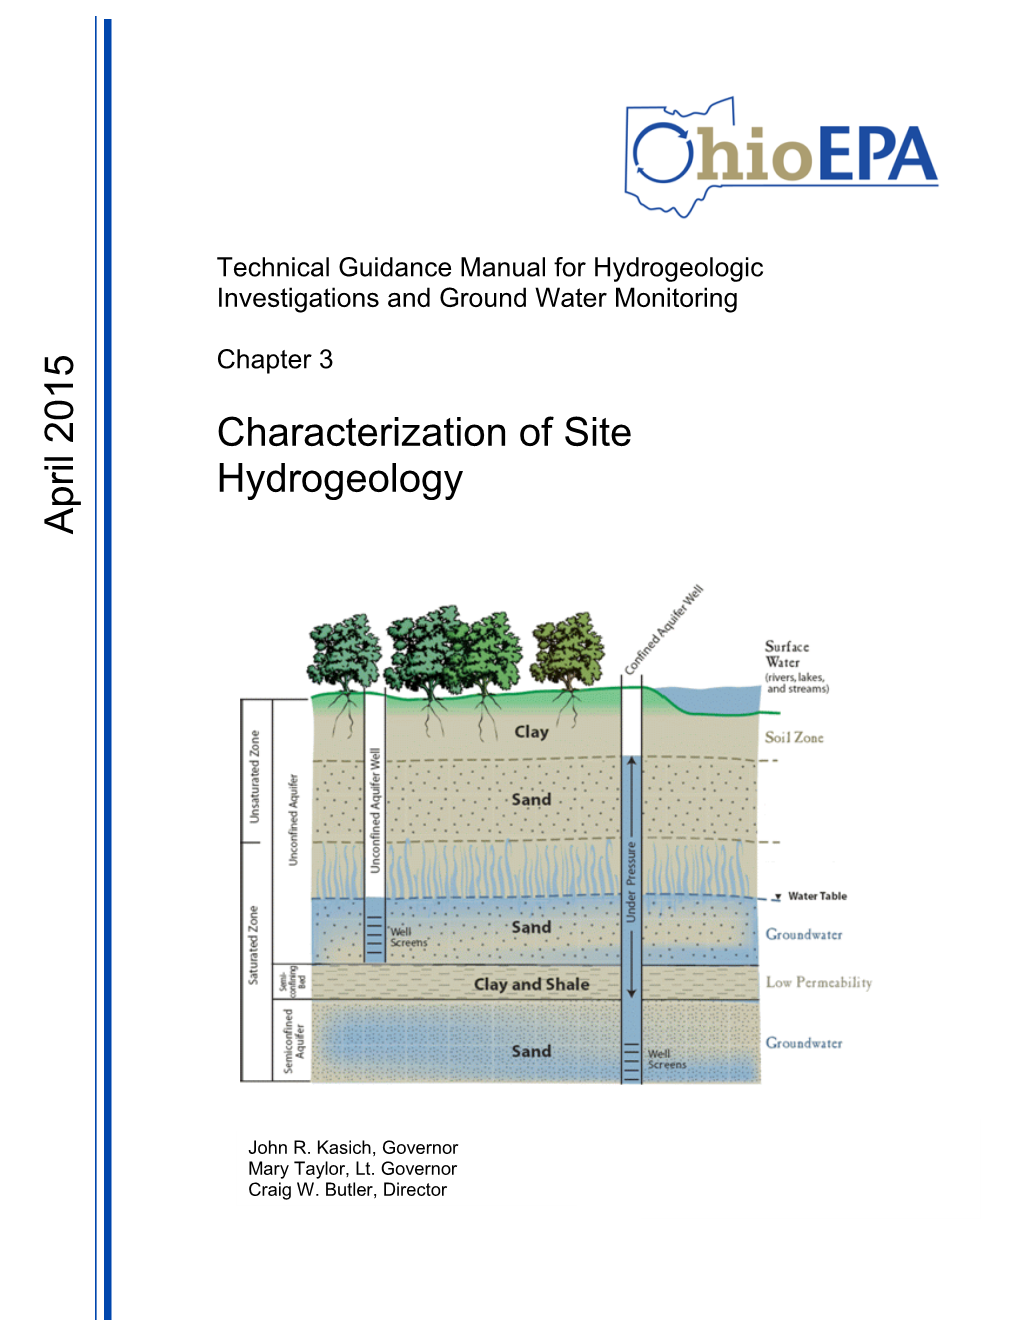 Characterization of Site Hydrogeology April 2015